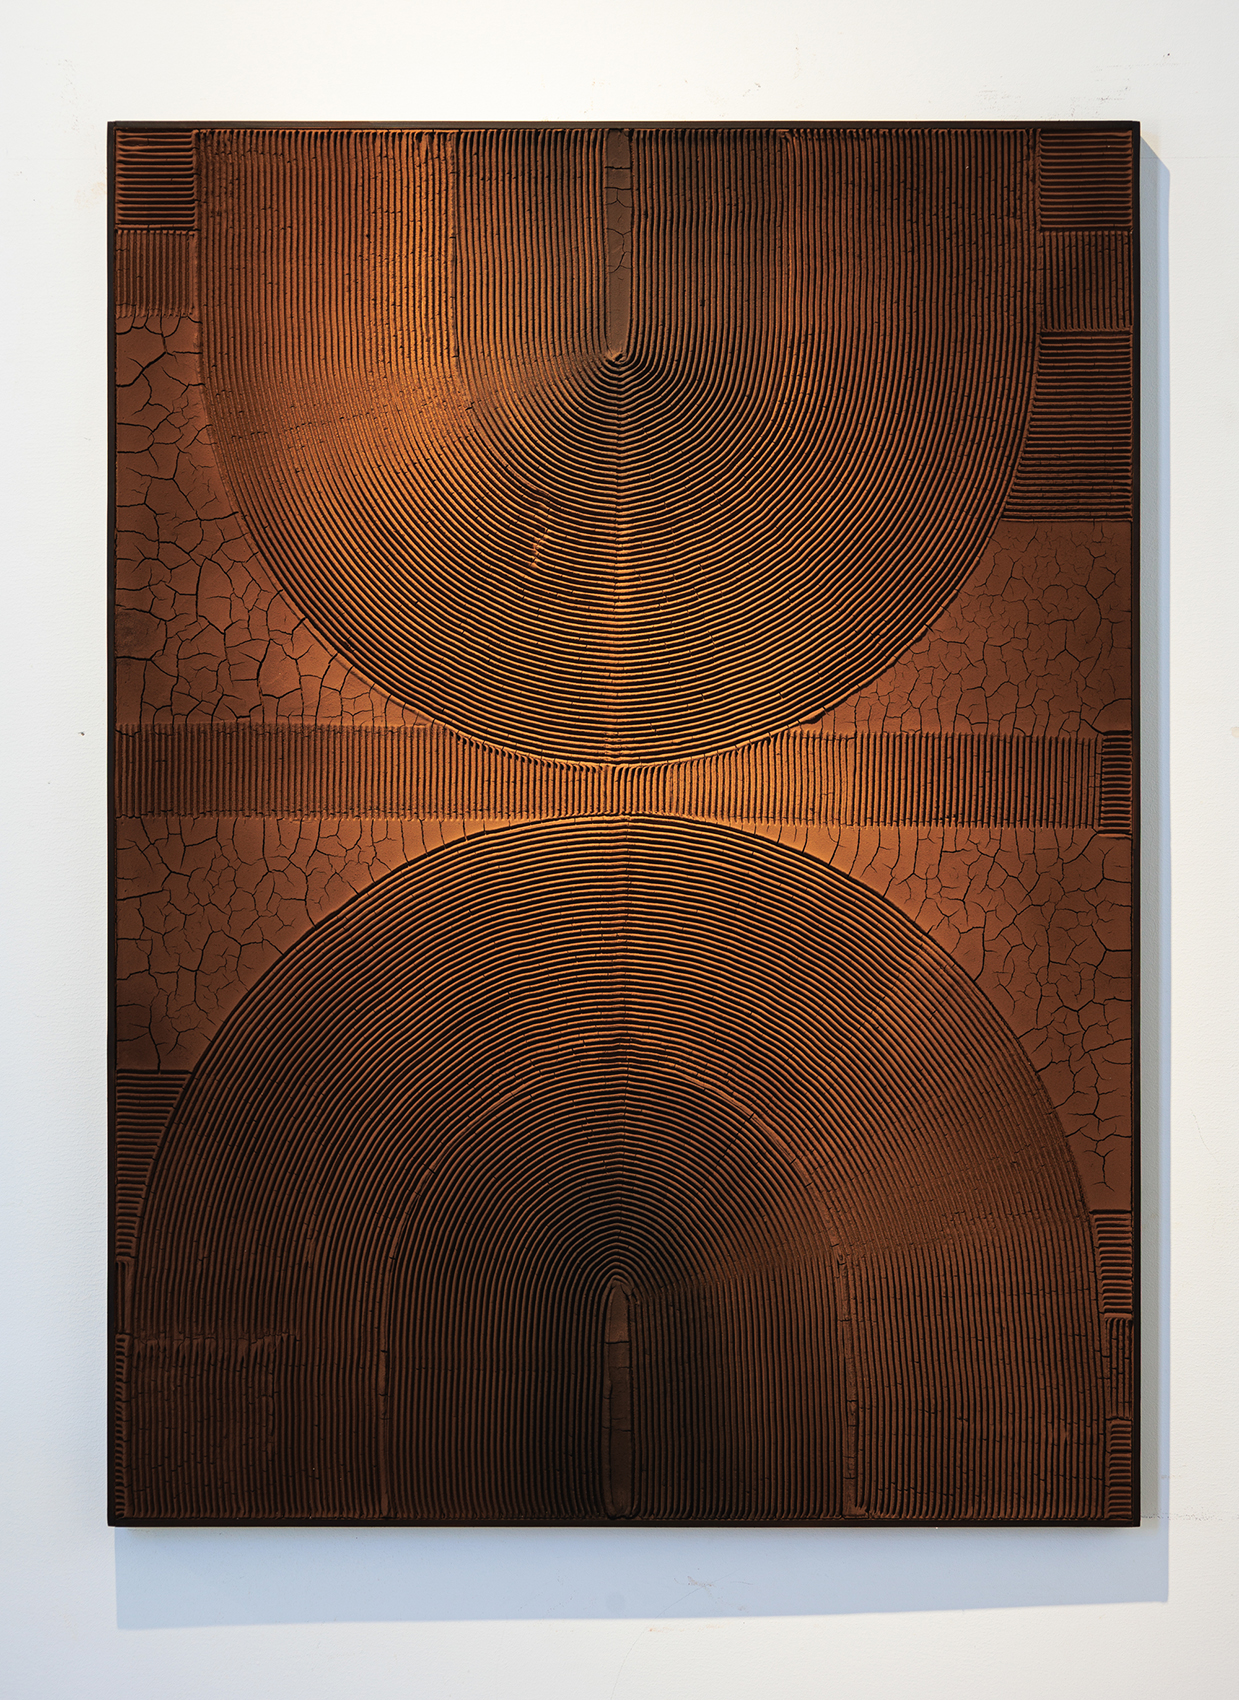 « ROUNDNESS» Year: 2023 Medium: Soil and pigments on wood Dimensions: 150 x 110 cm x4 cm